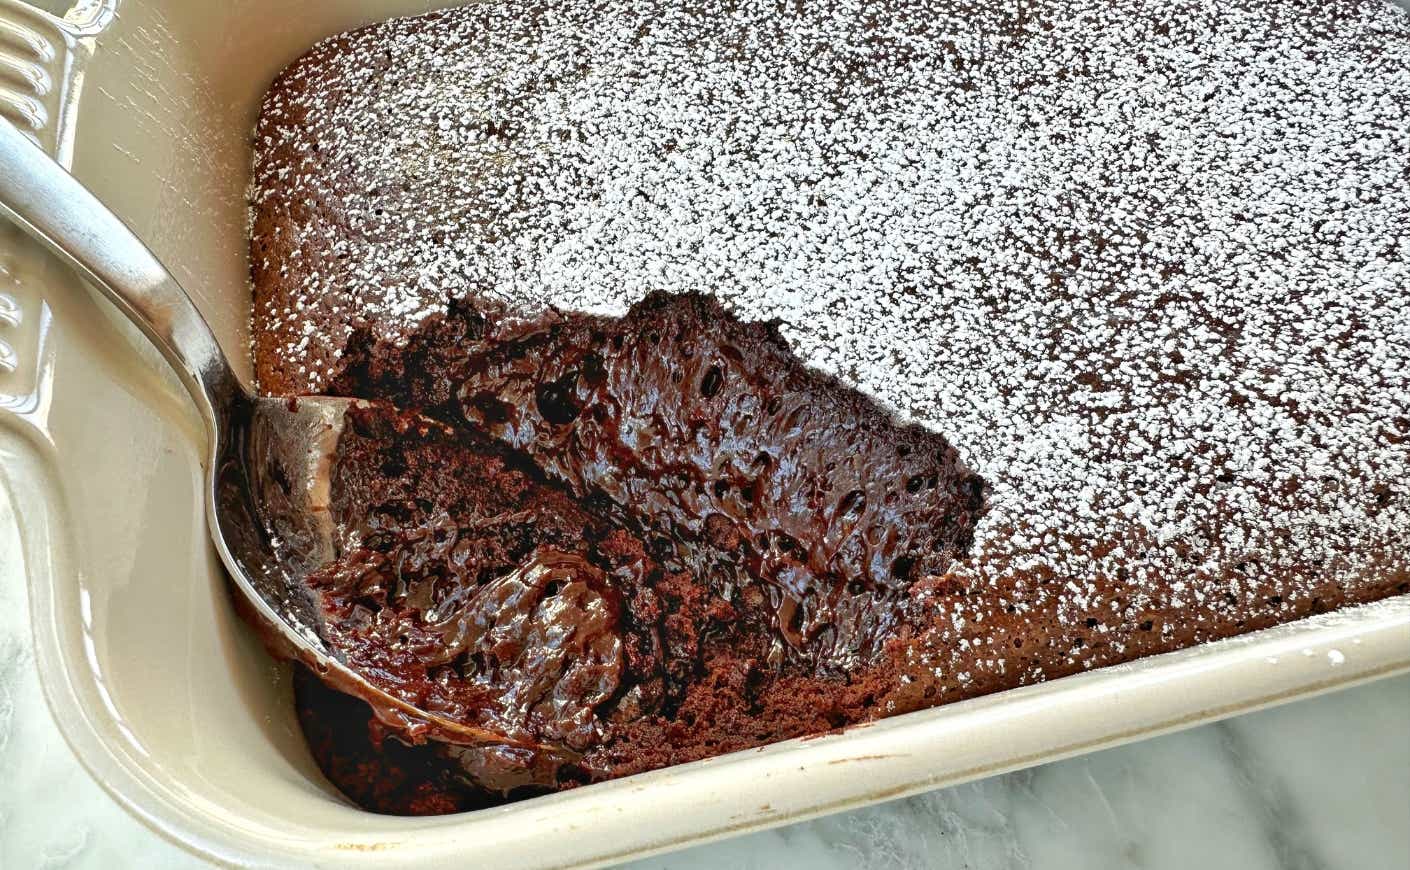 A dish of molten chocolate cake.